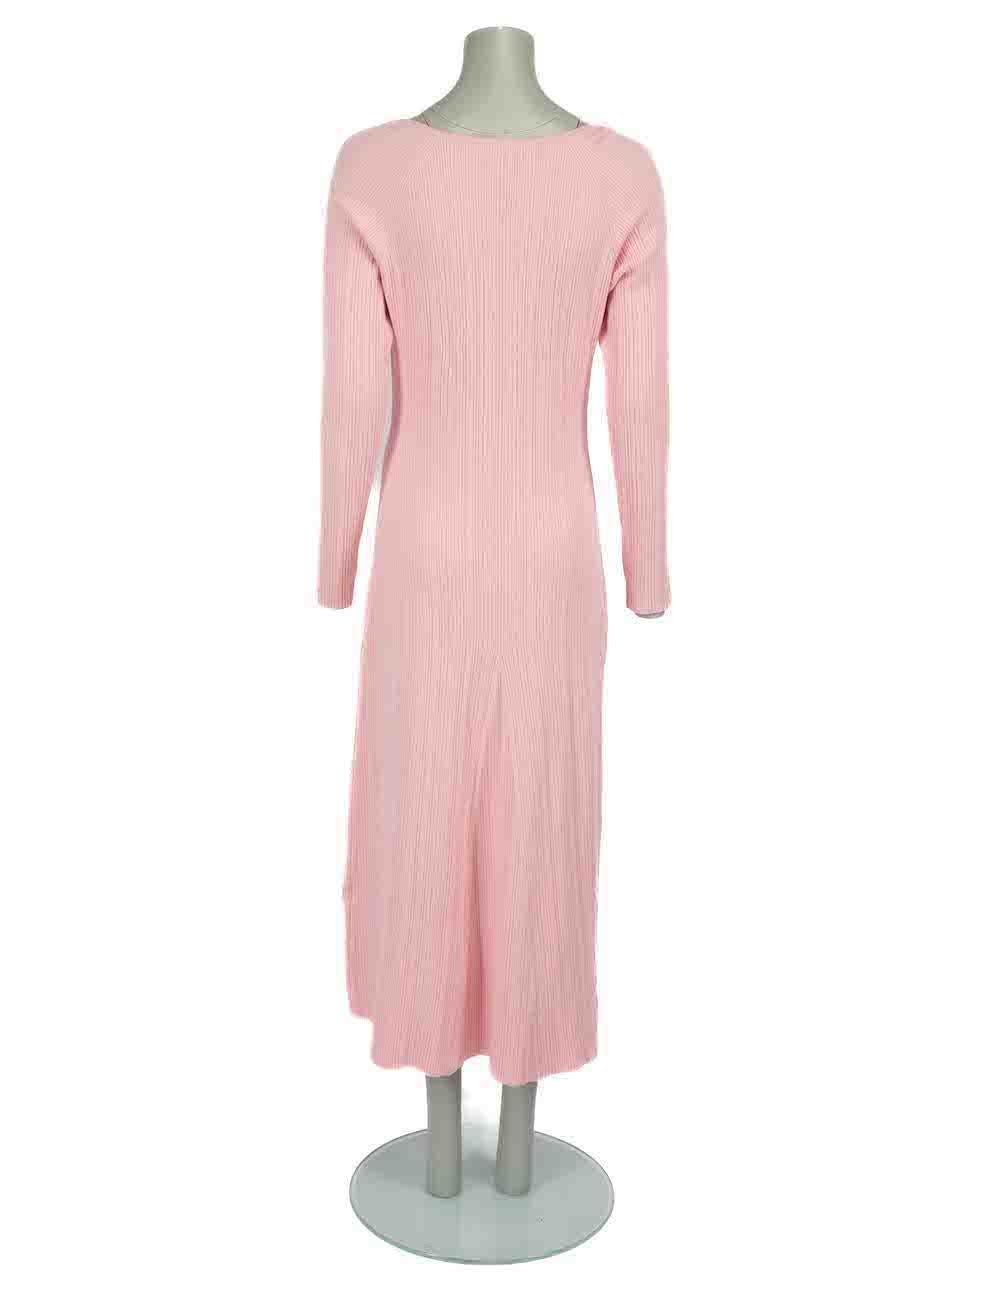 ANNA QUAN Pink Rib Knit Midi Dress Size XL In Excellent Condition For Sale In London, GB